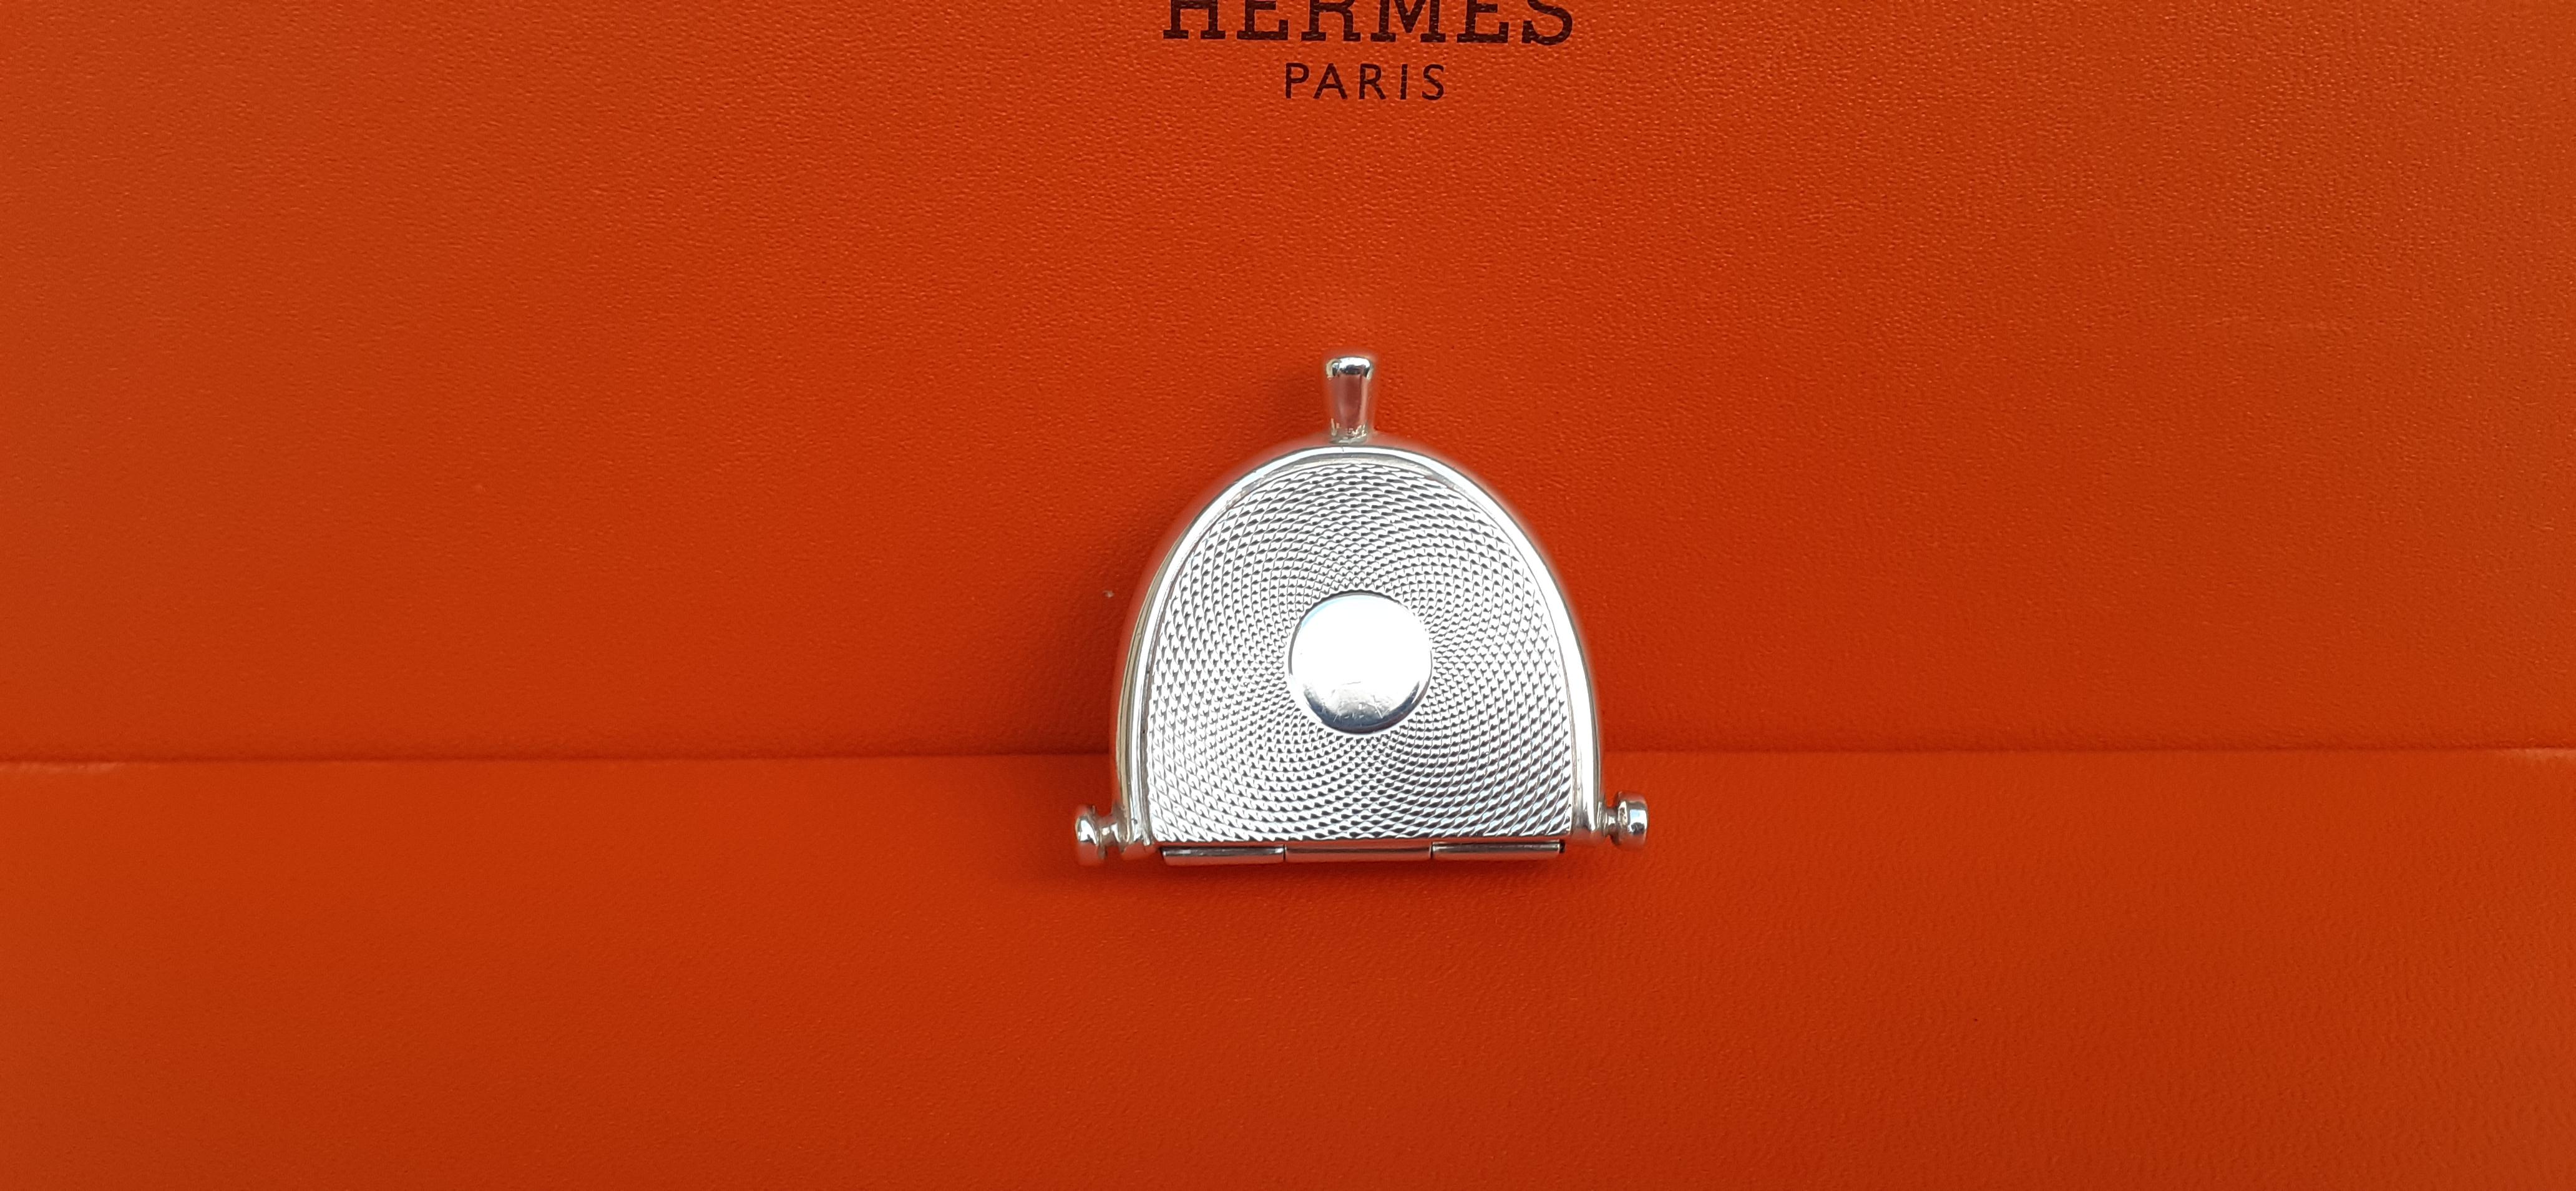 Exceptional Hermès Guilloche Spur Shaped Pill Box By Ravinet d'Enfert For Sale 9